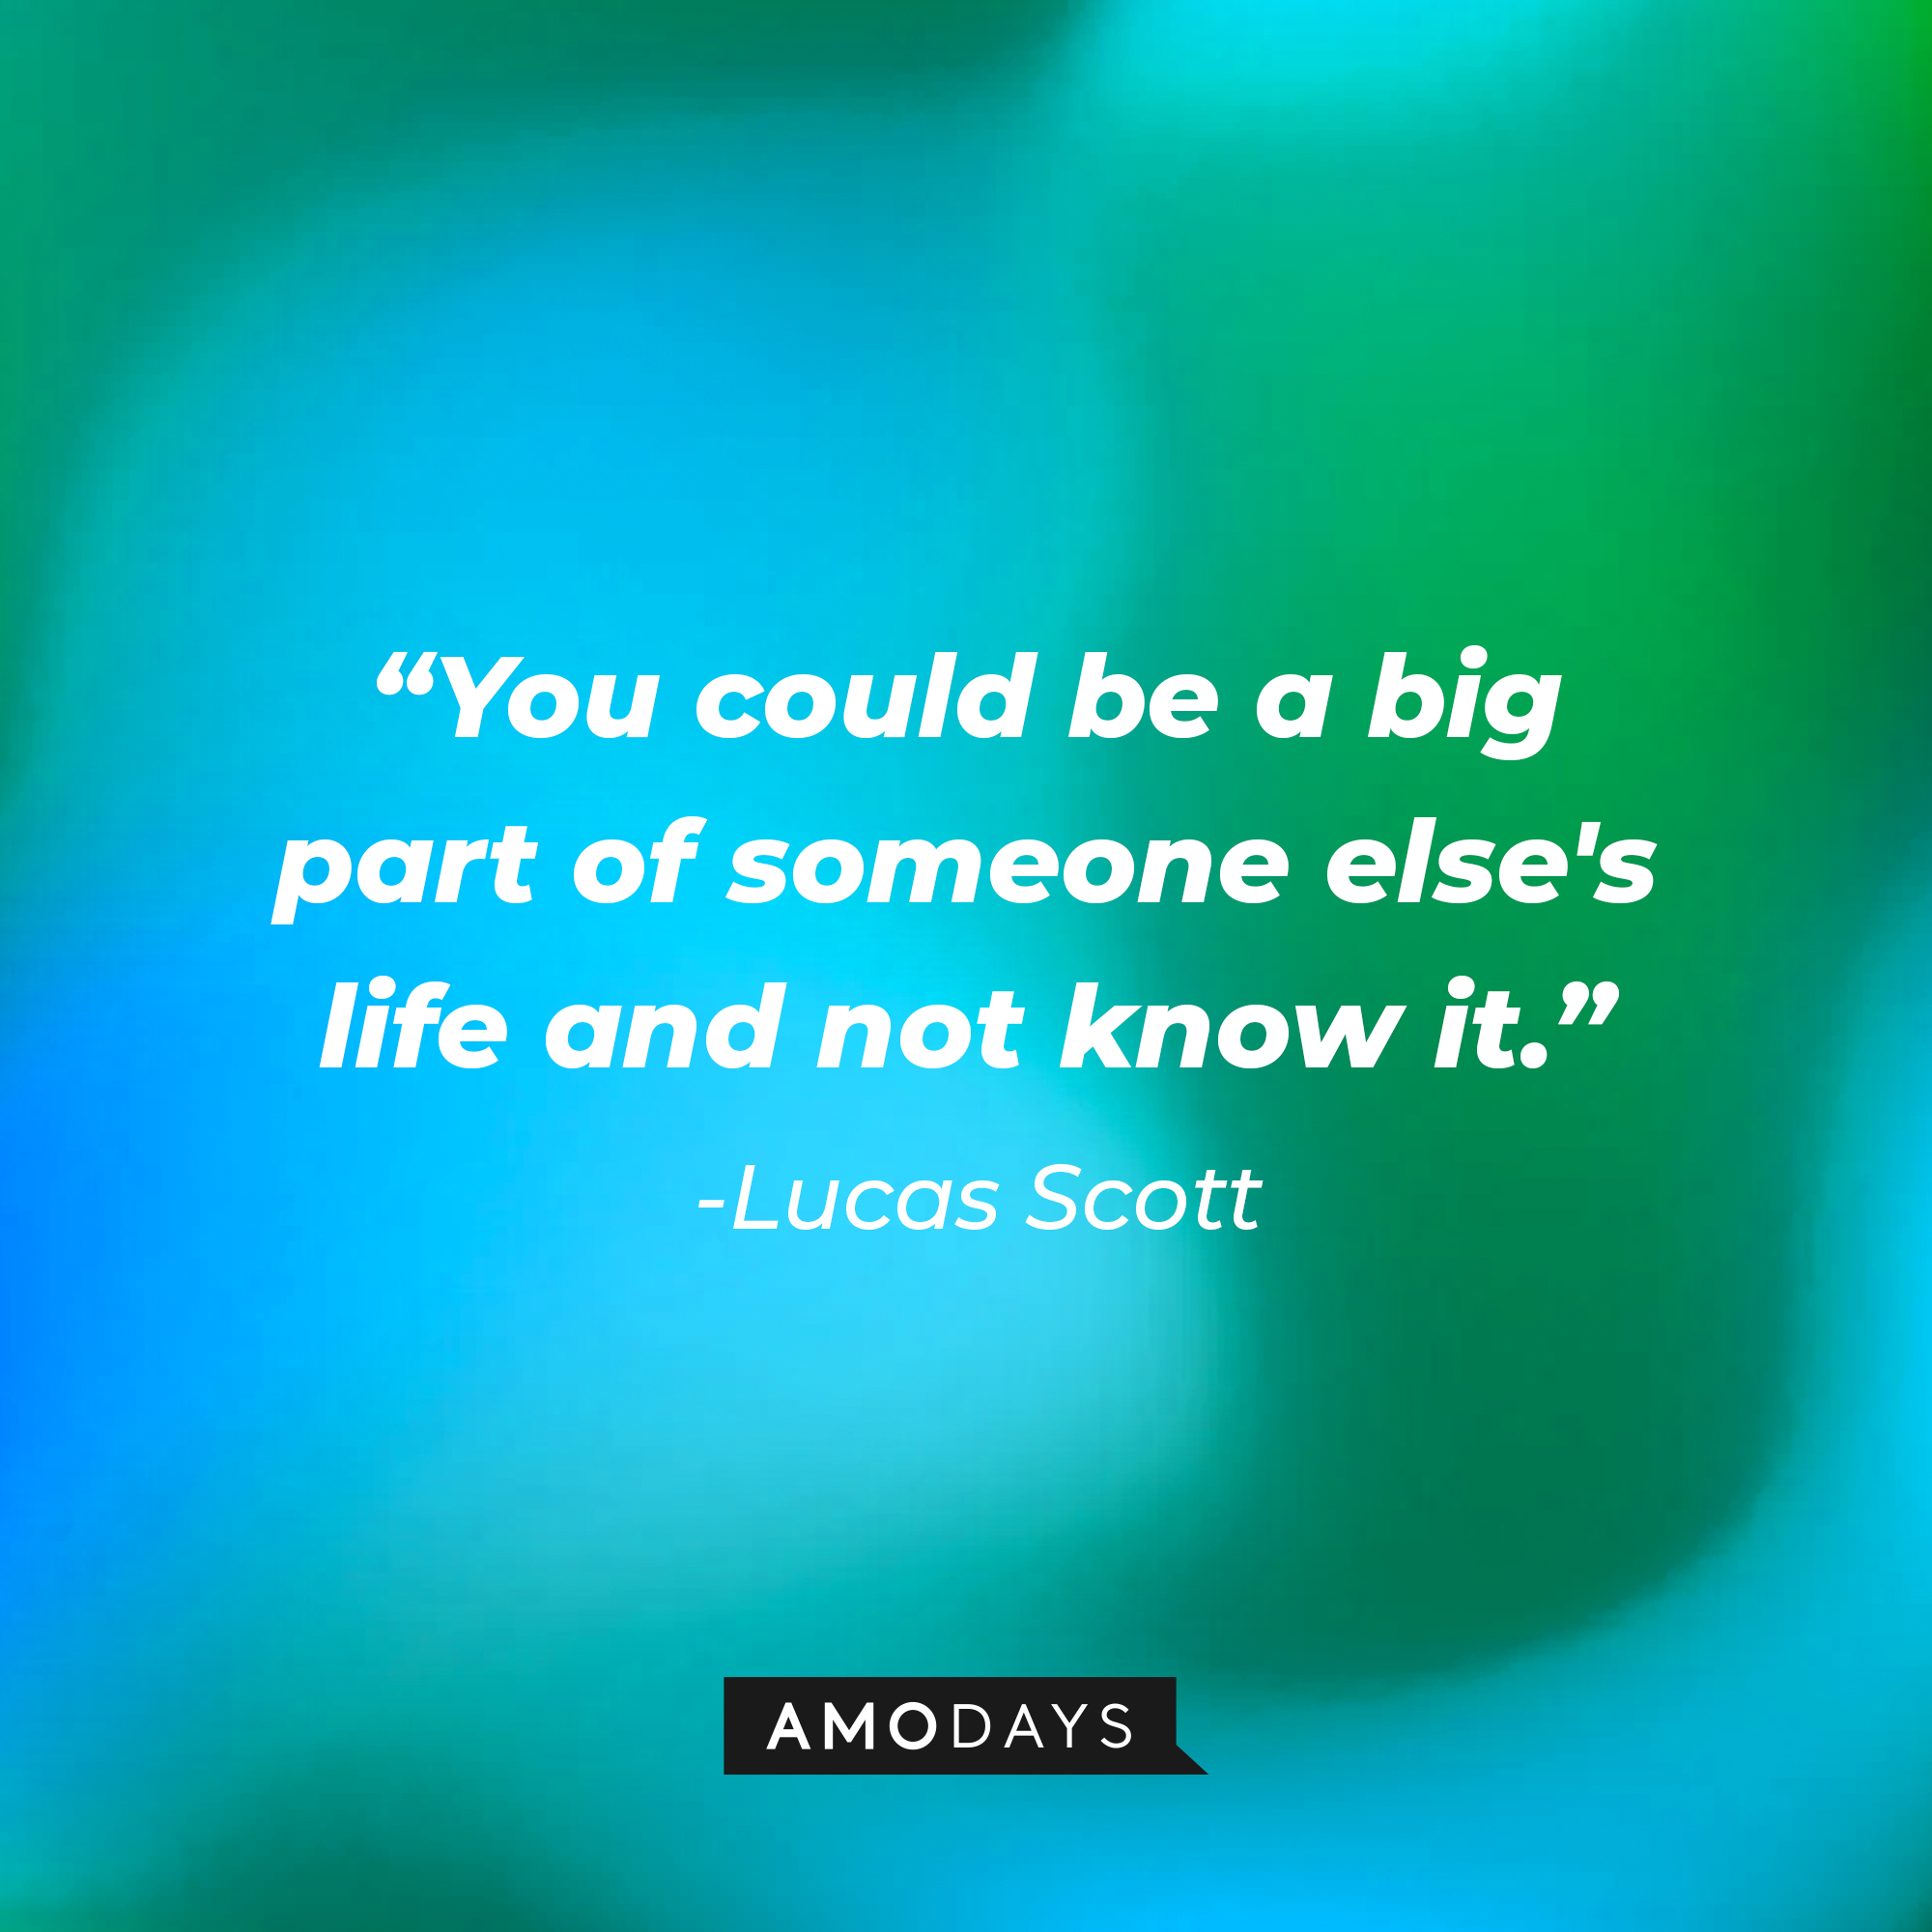 Lucas Scott’s quote: “You could be a big part of someone else's life and not know it.” | Source:facebook.com/OneTreeHill